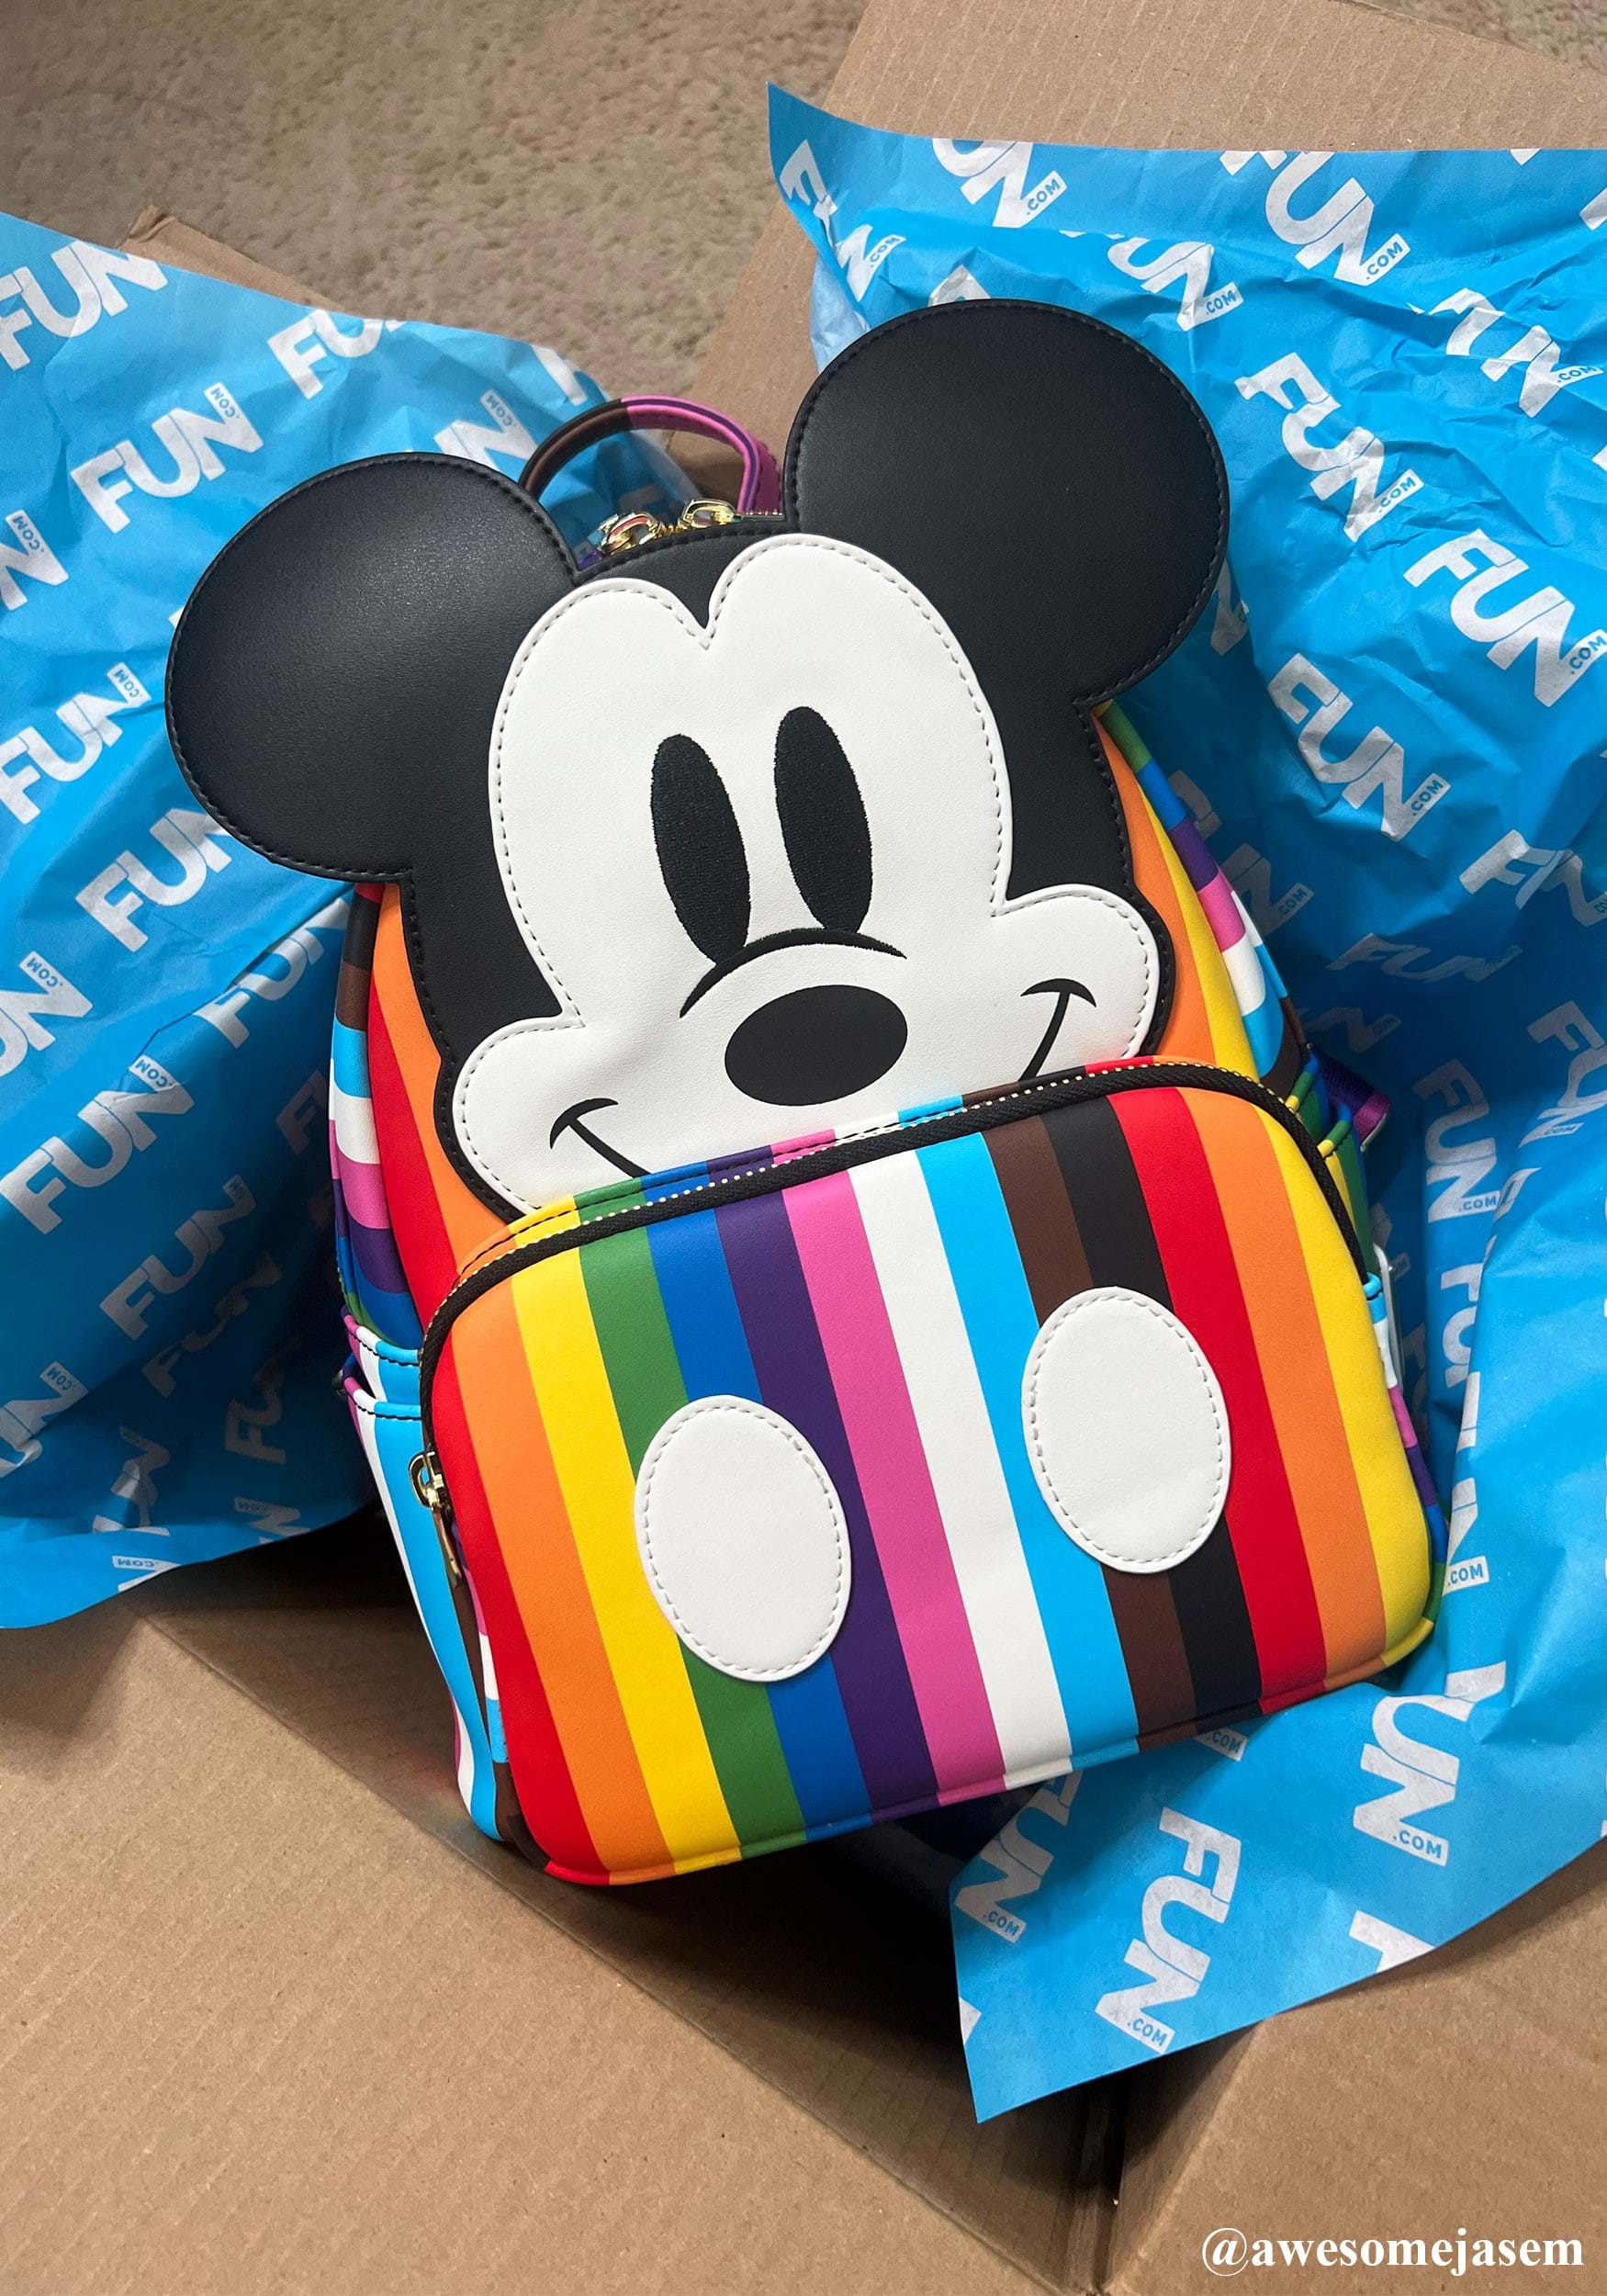 Mickey Mouse Rainbow Tote Bag